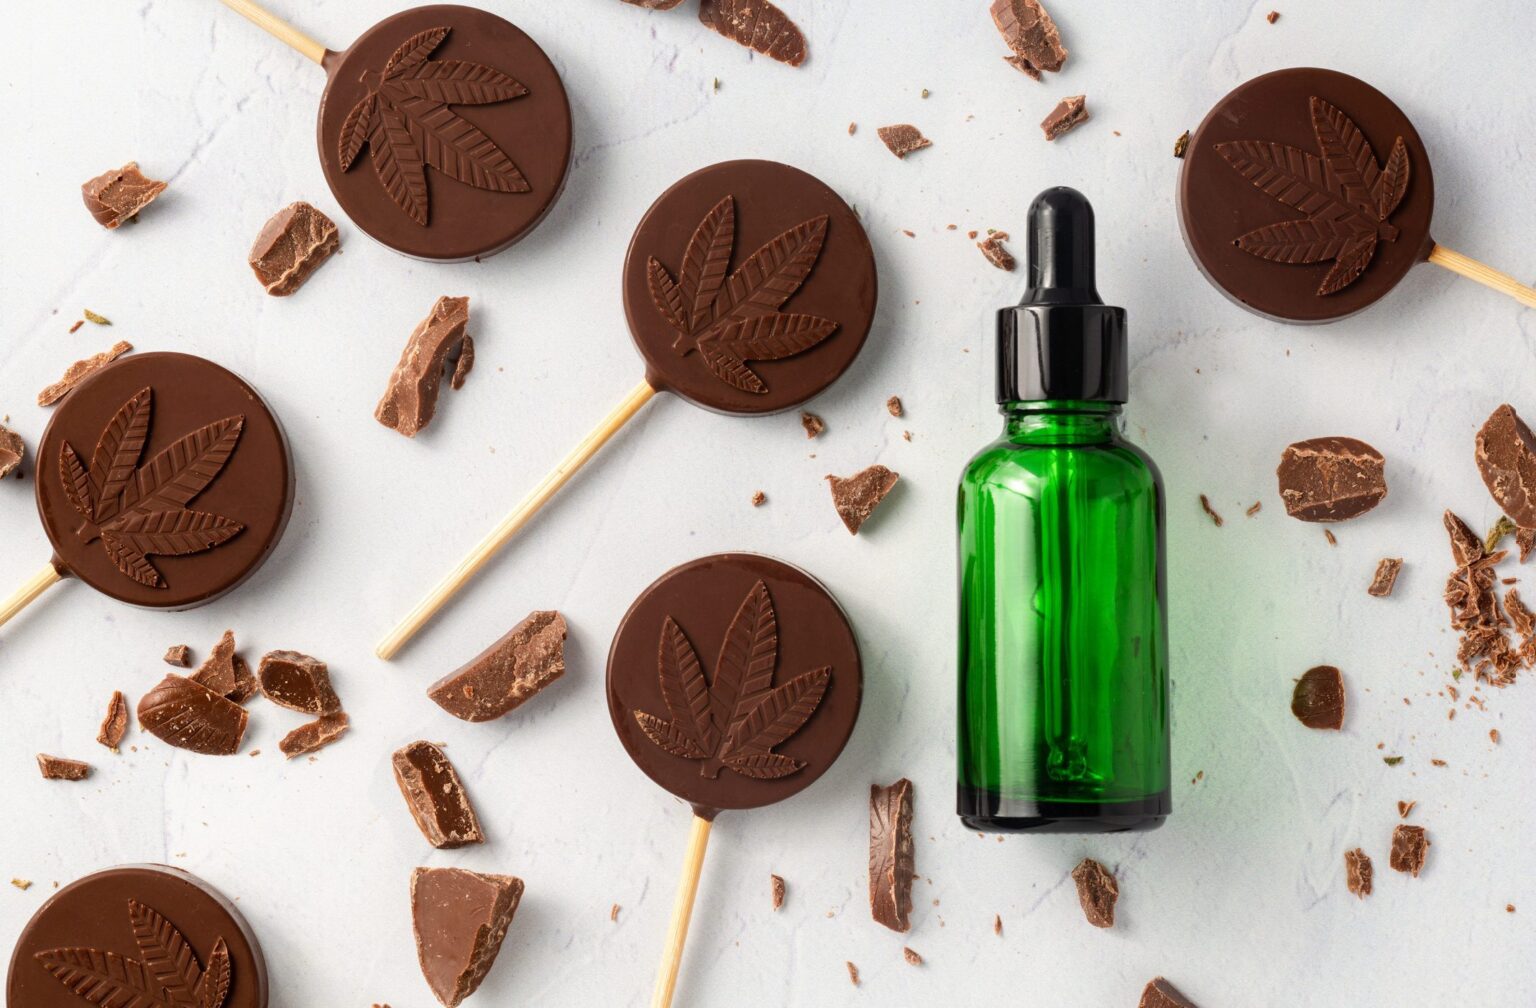 While you can indulge in vapes, tinctures, and concentrates, CBD edibles are the most popular products. Here's why.